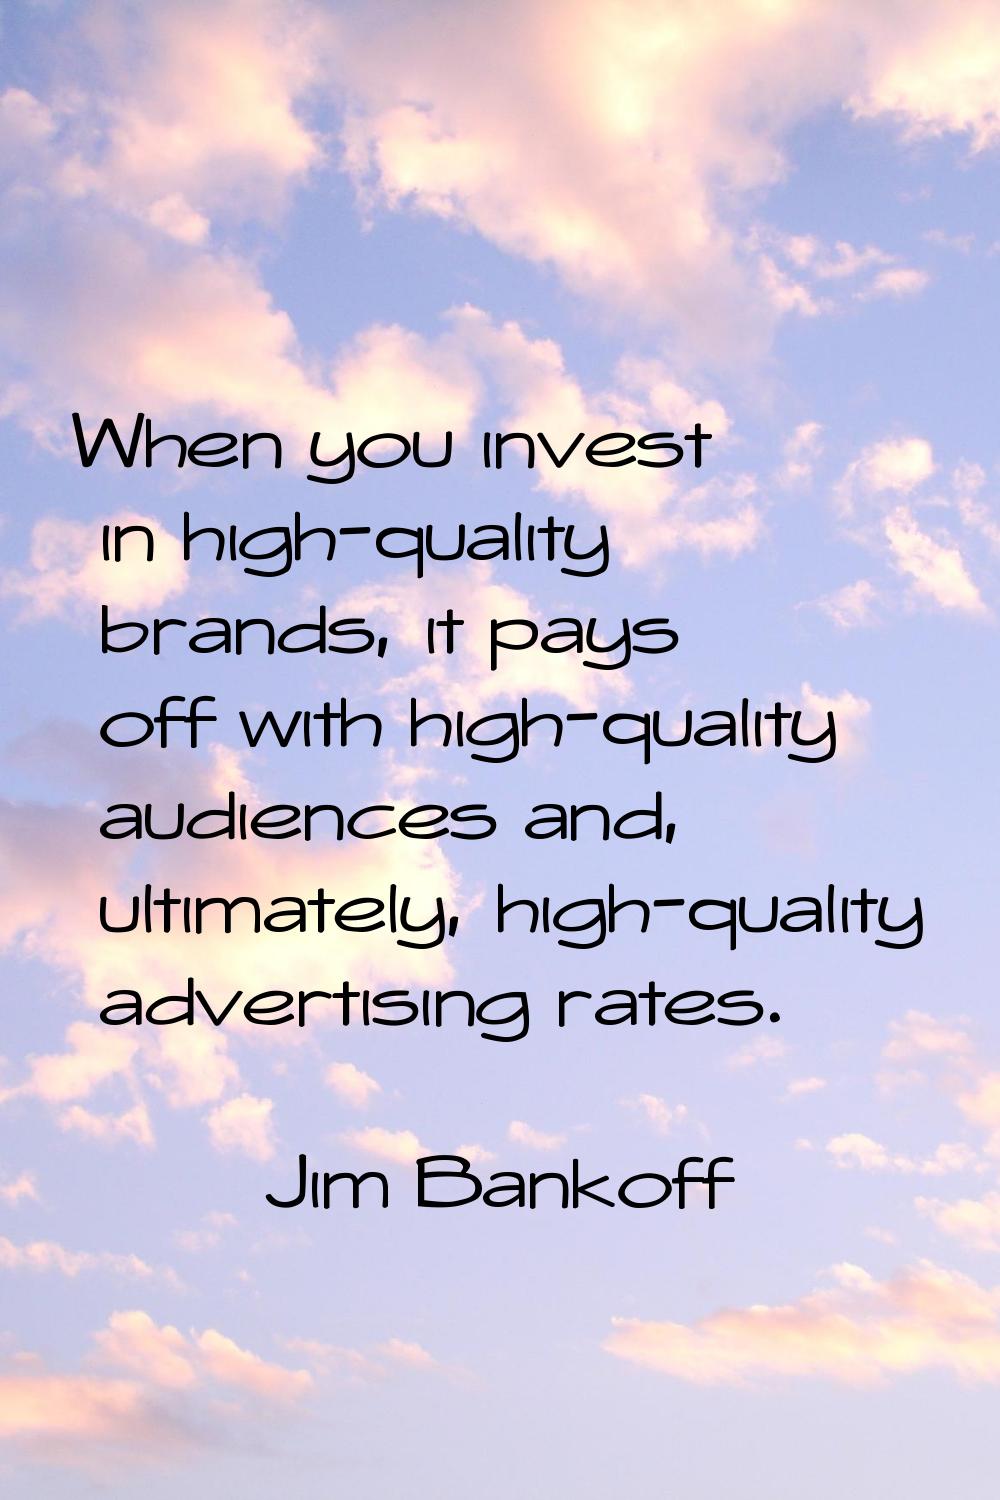 When you invest in high-quality brands, it pays off with high-quality audiences and, ultimately, hi